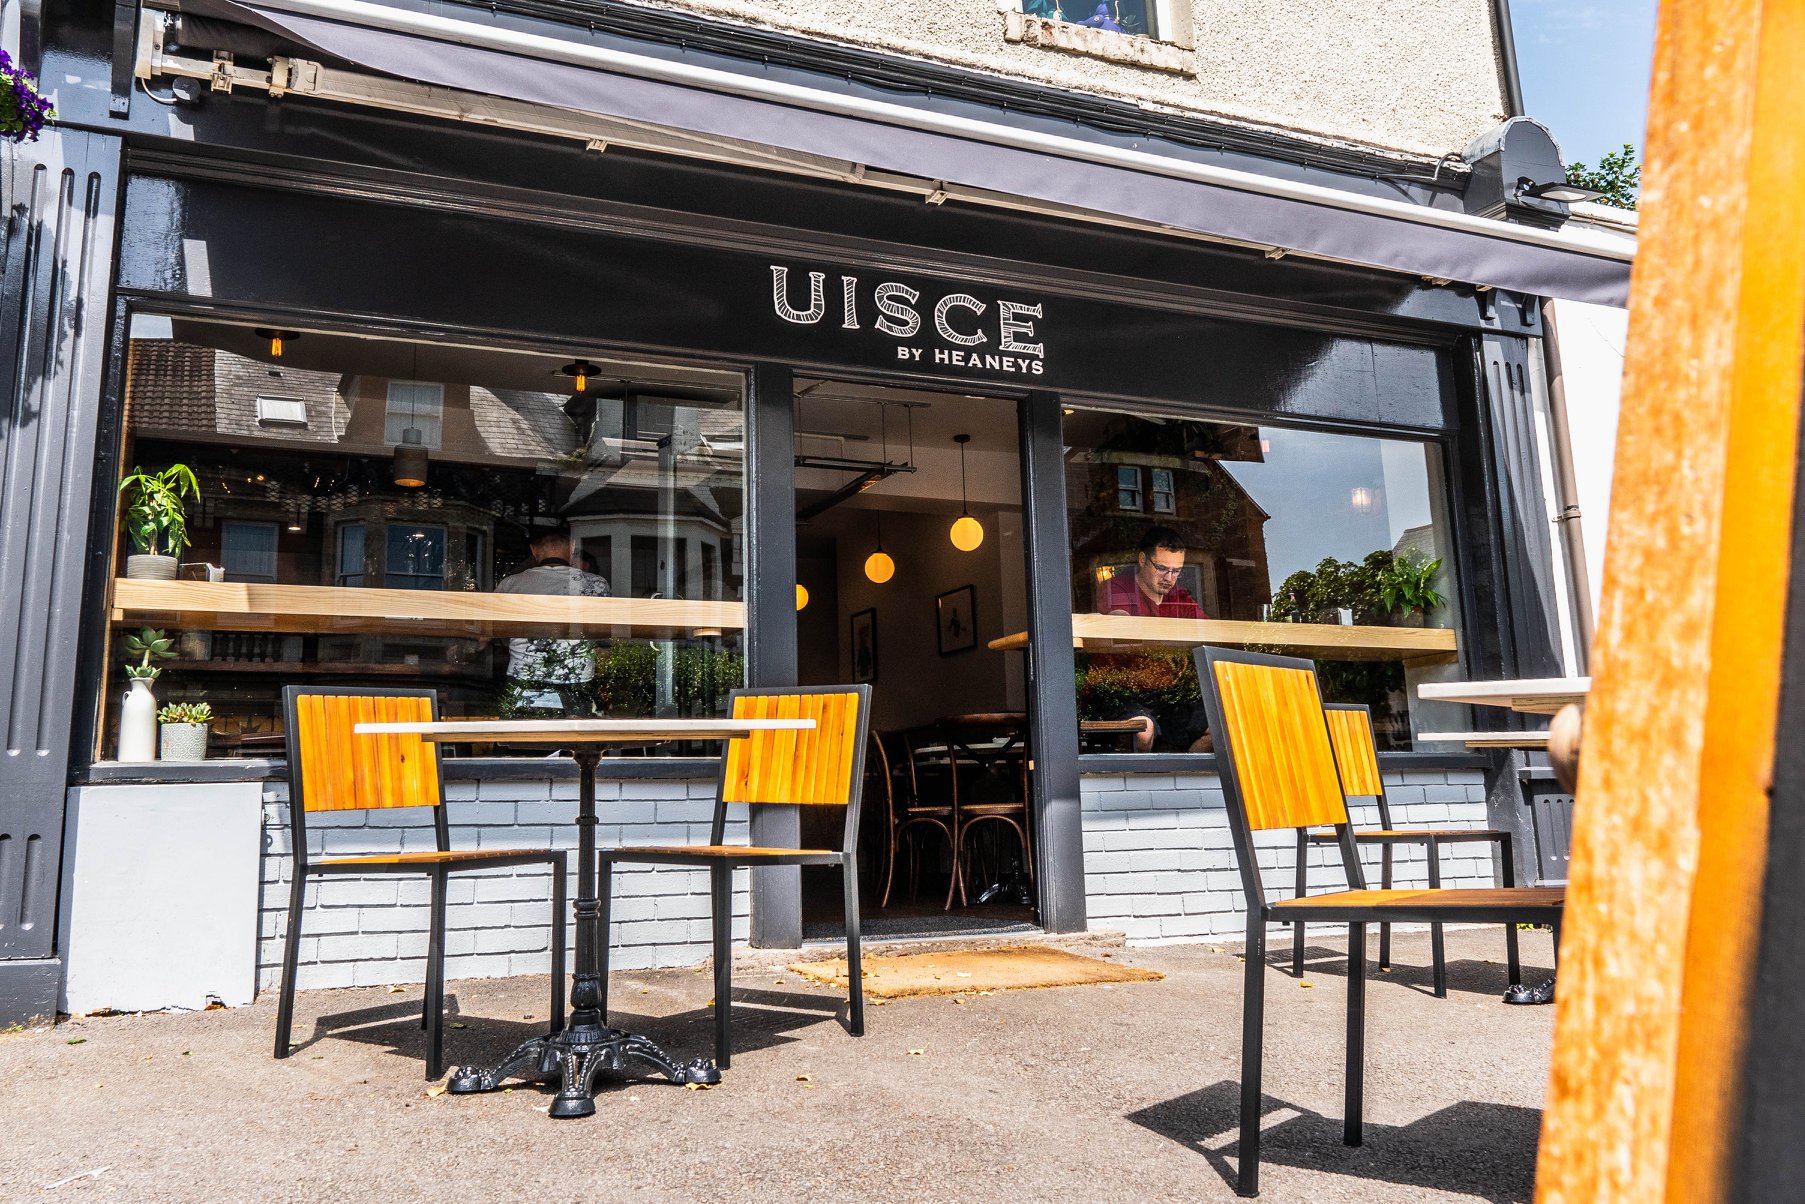 Uisce by Heaney's